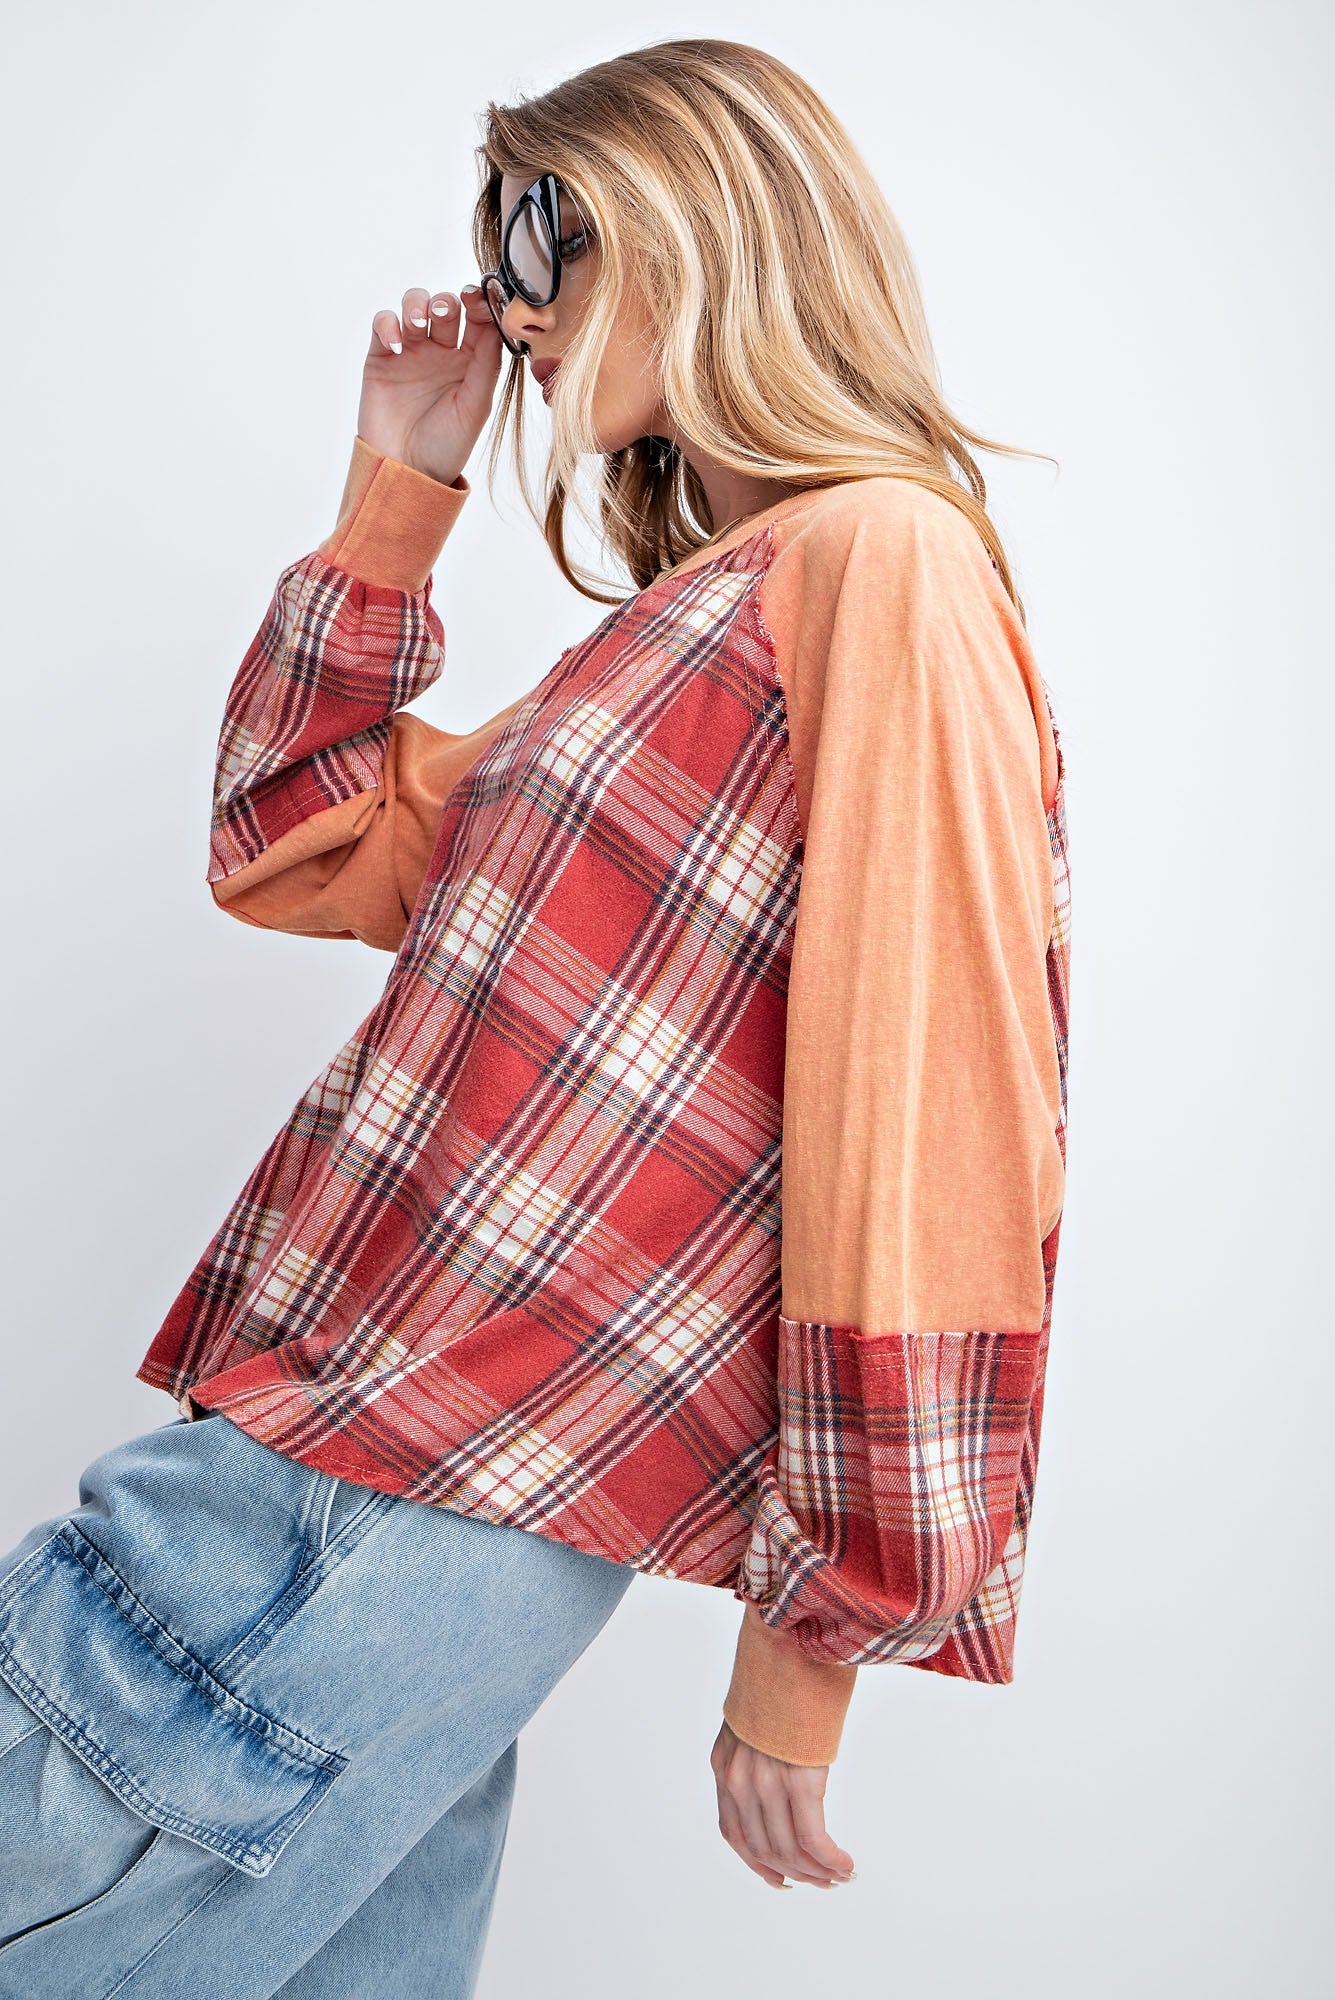 Easel Coral Red Plaid Mix Mineral Washed Rounded Neck Loose Fit Pullover Top - Roulhac Fashion Boutique